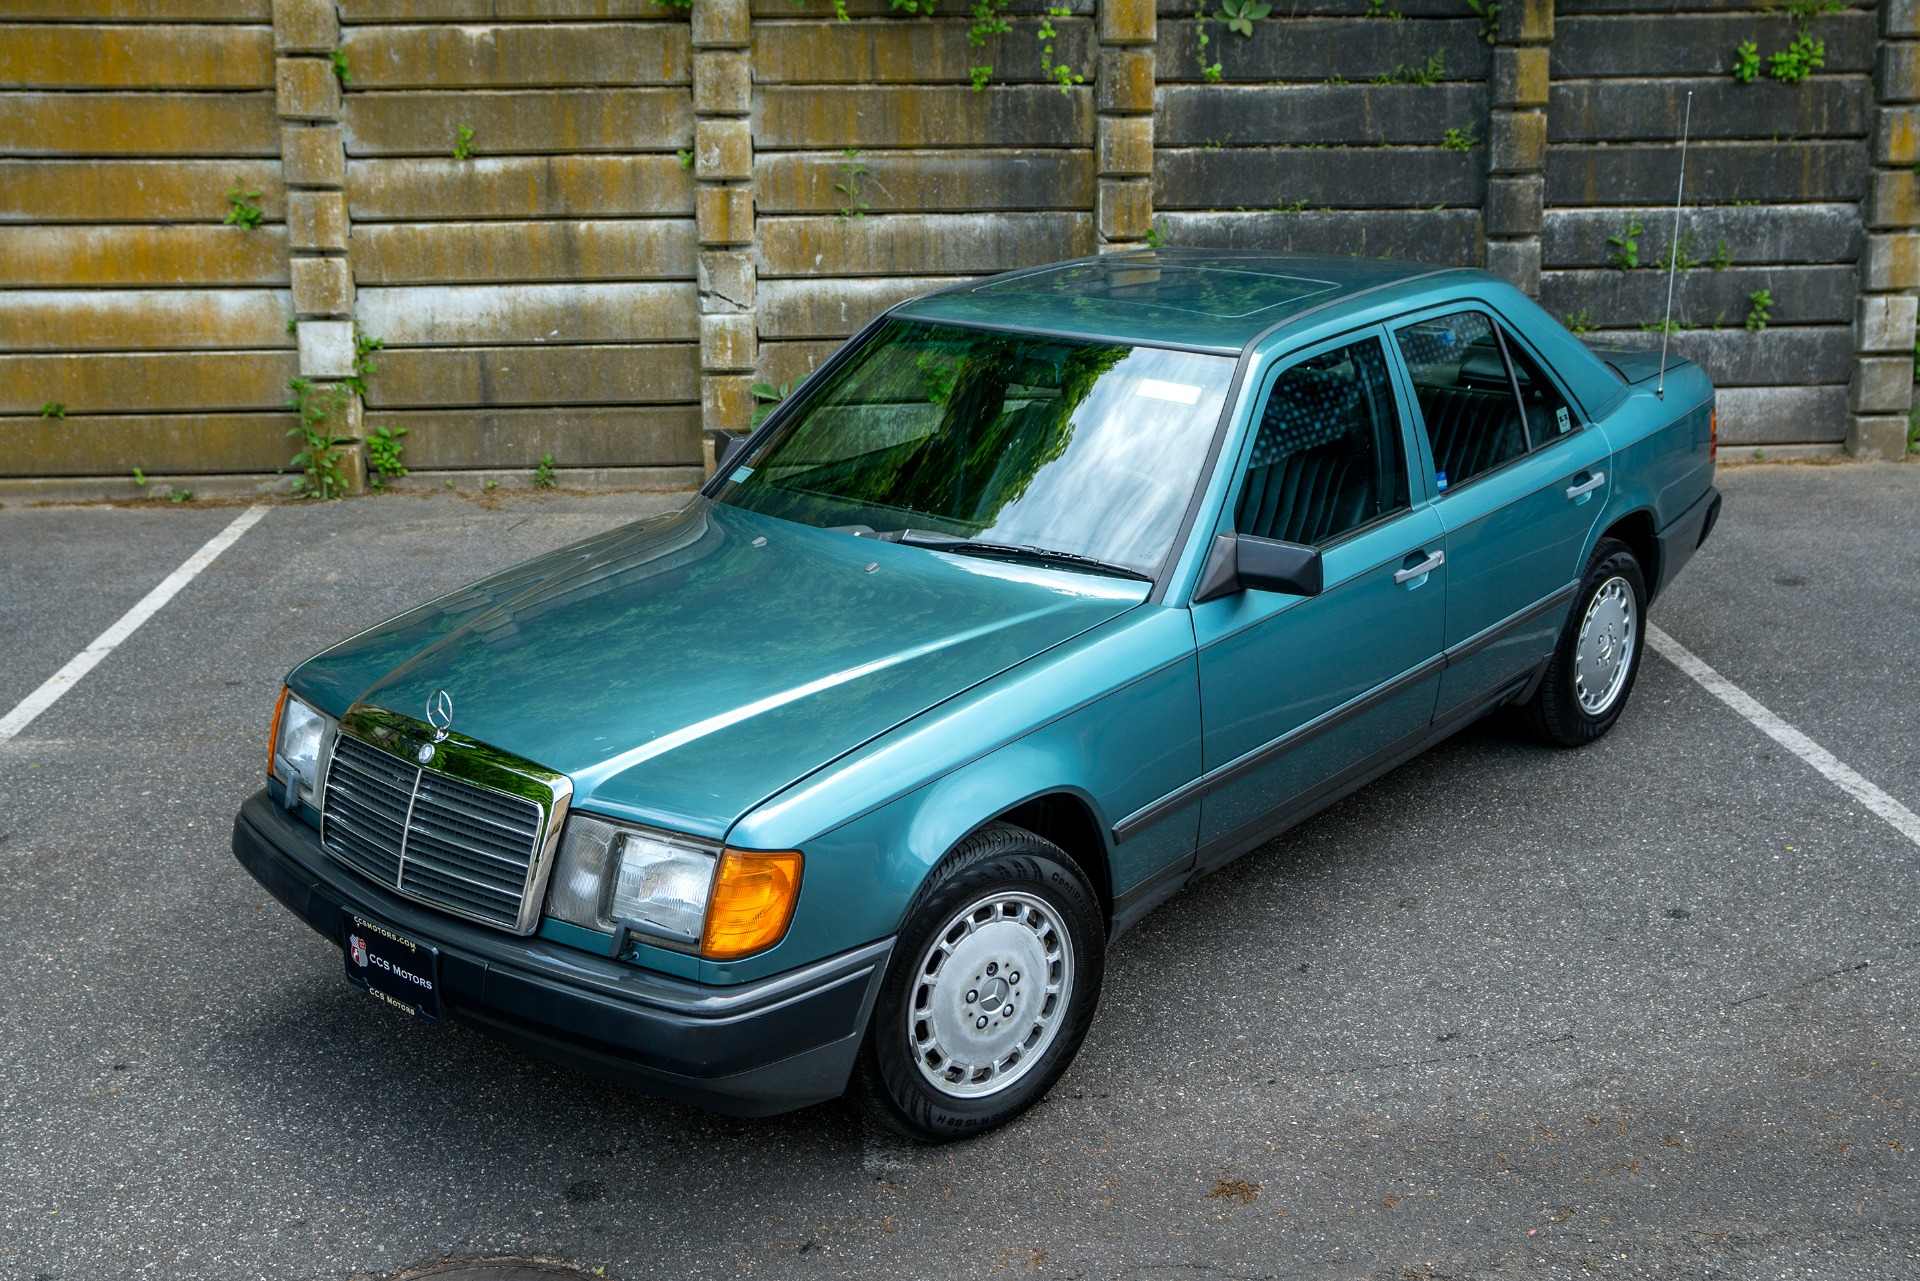 1987 Mercedes-Benz 300D E-CLASS Stock # 1513 for sale near Oyster Bay, NY | NY Mercedes-Benz Dealer